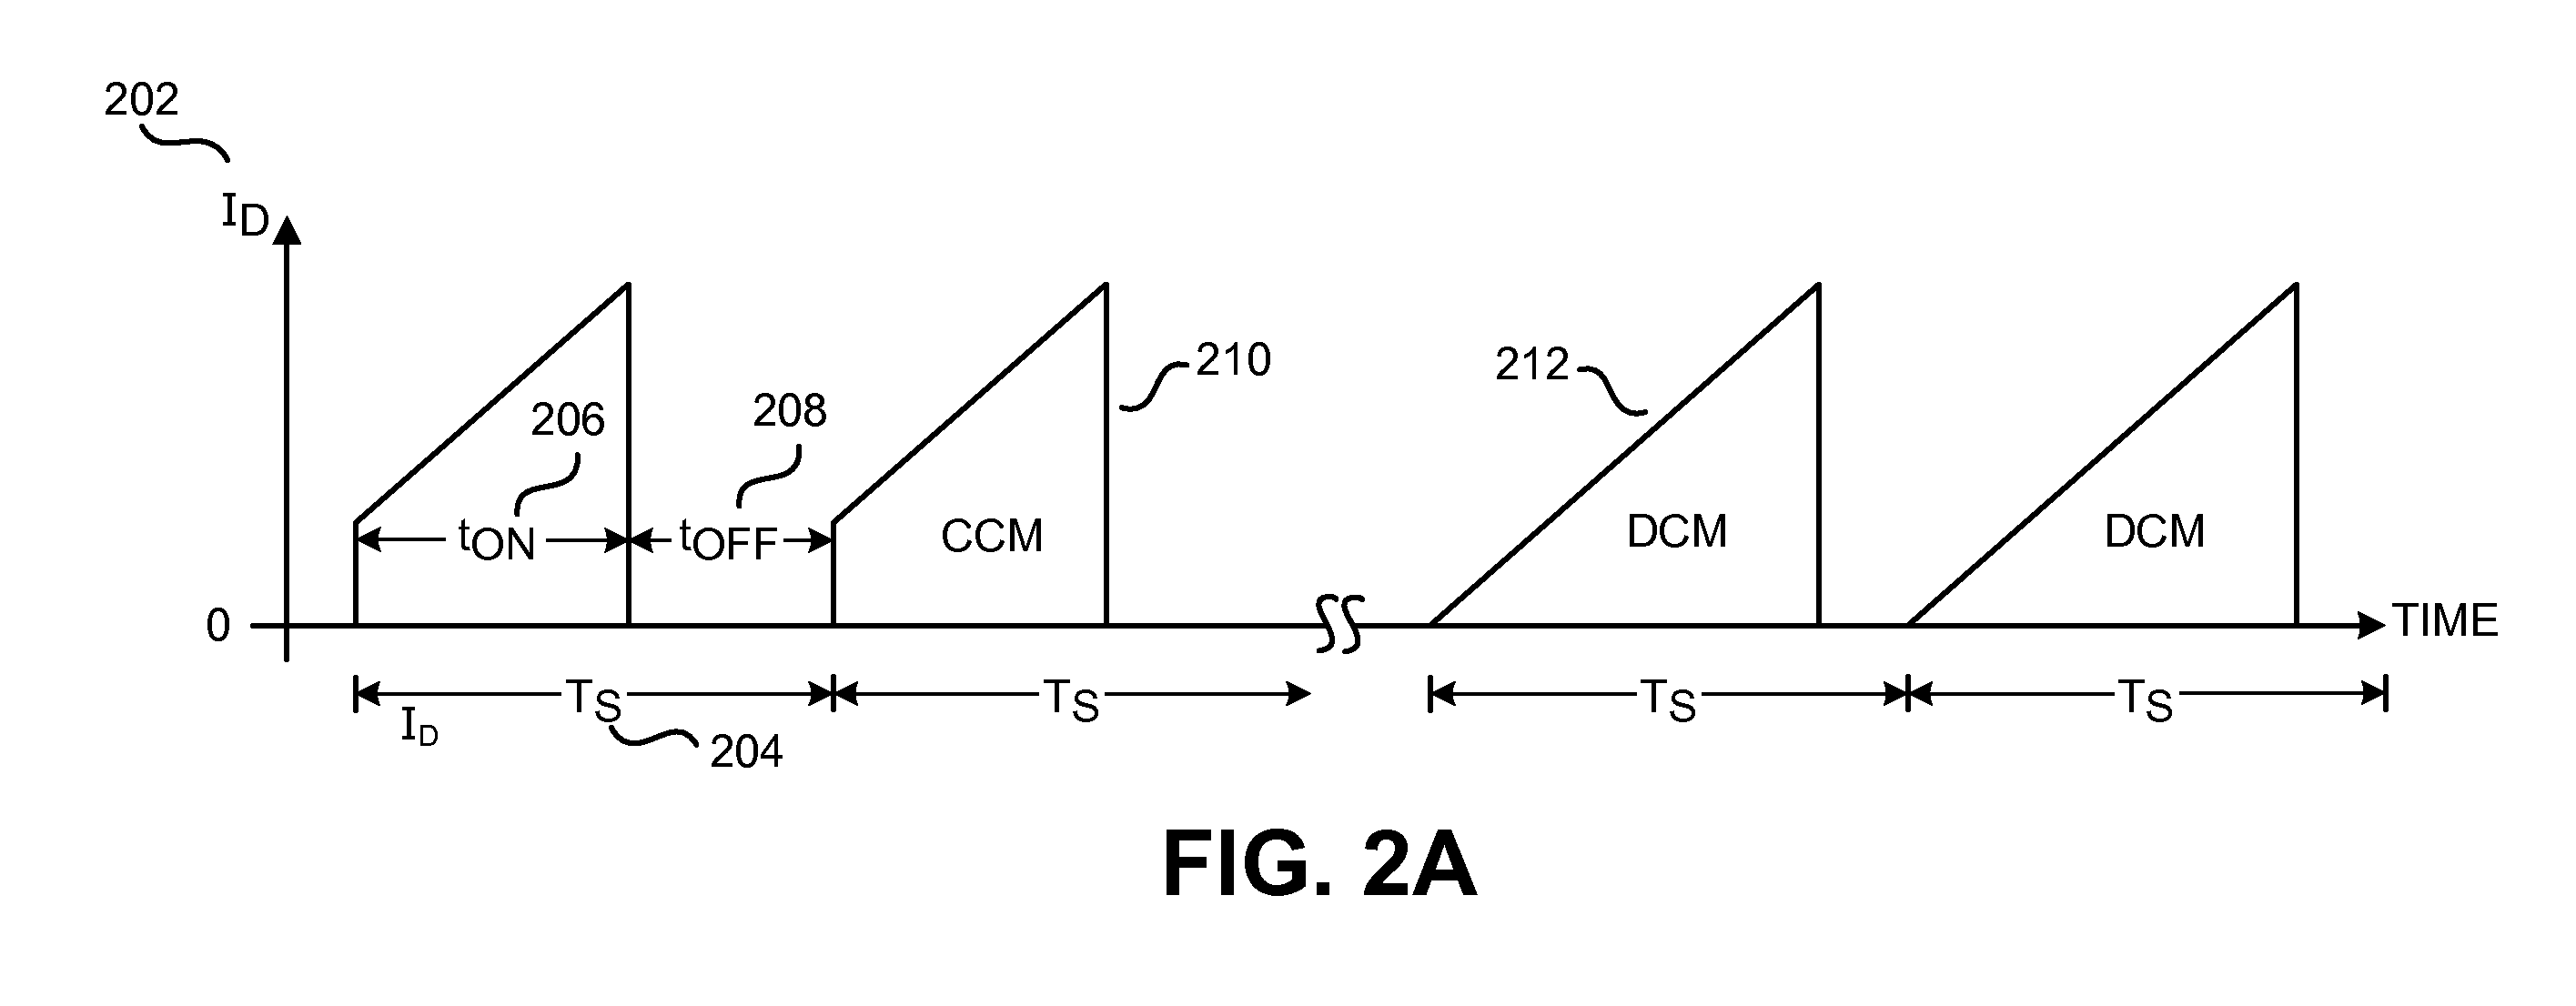 Controller compensation for frequency jitter